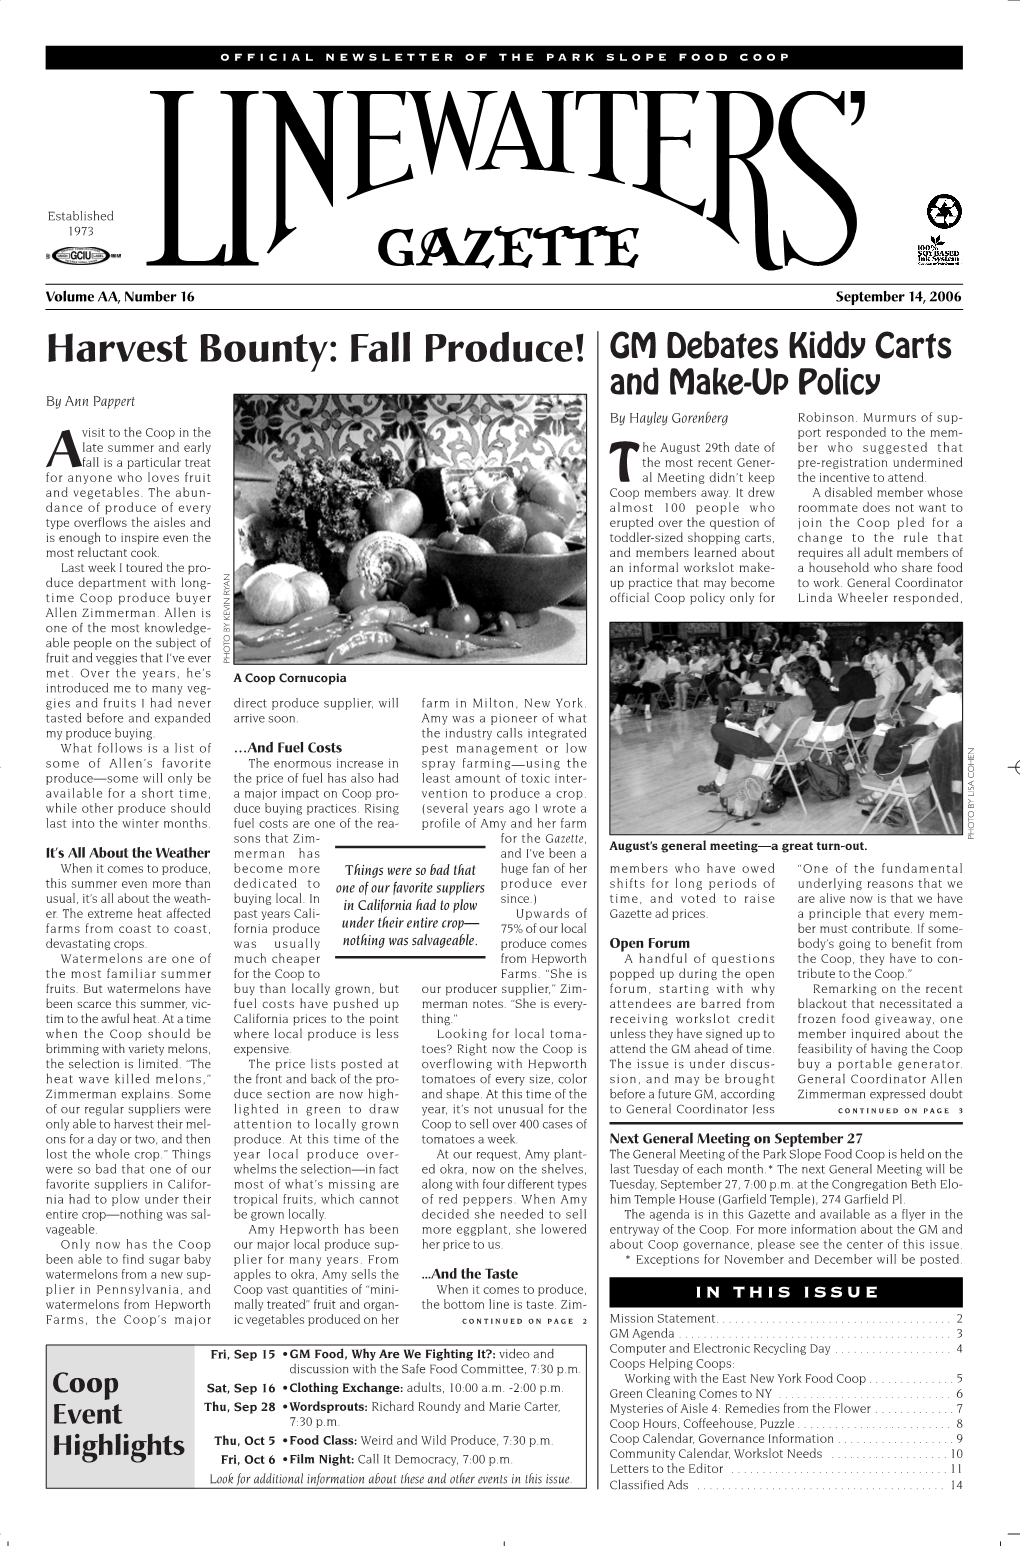 Fall Produce! GM Debates Kiddy Carts and Make-Up Policy by Ann Pappert by Hayley Gorenberg Robinson